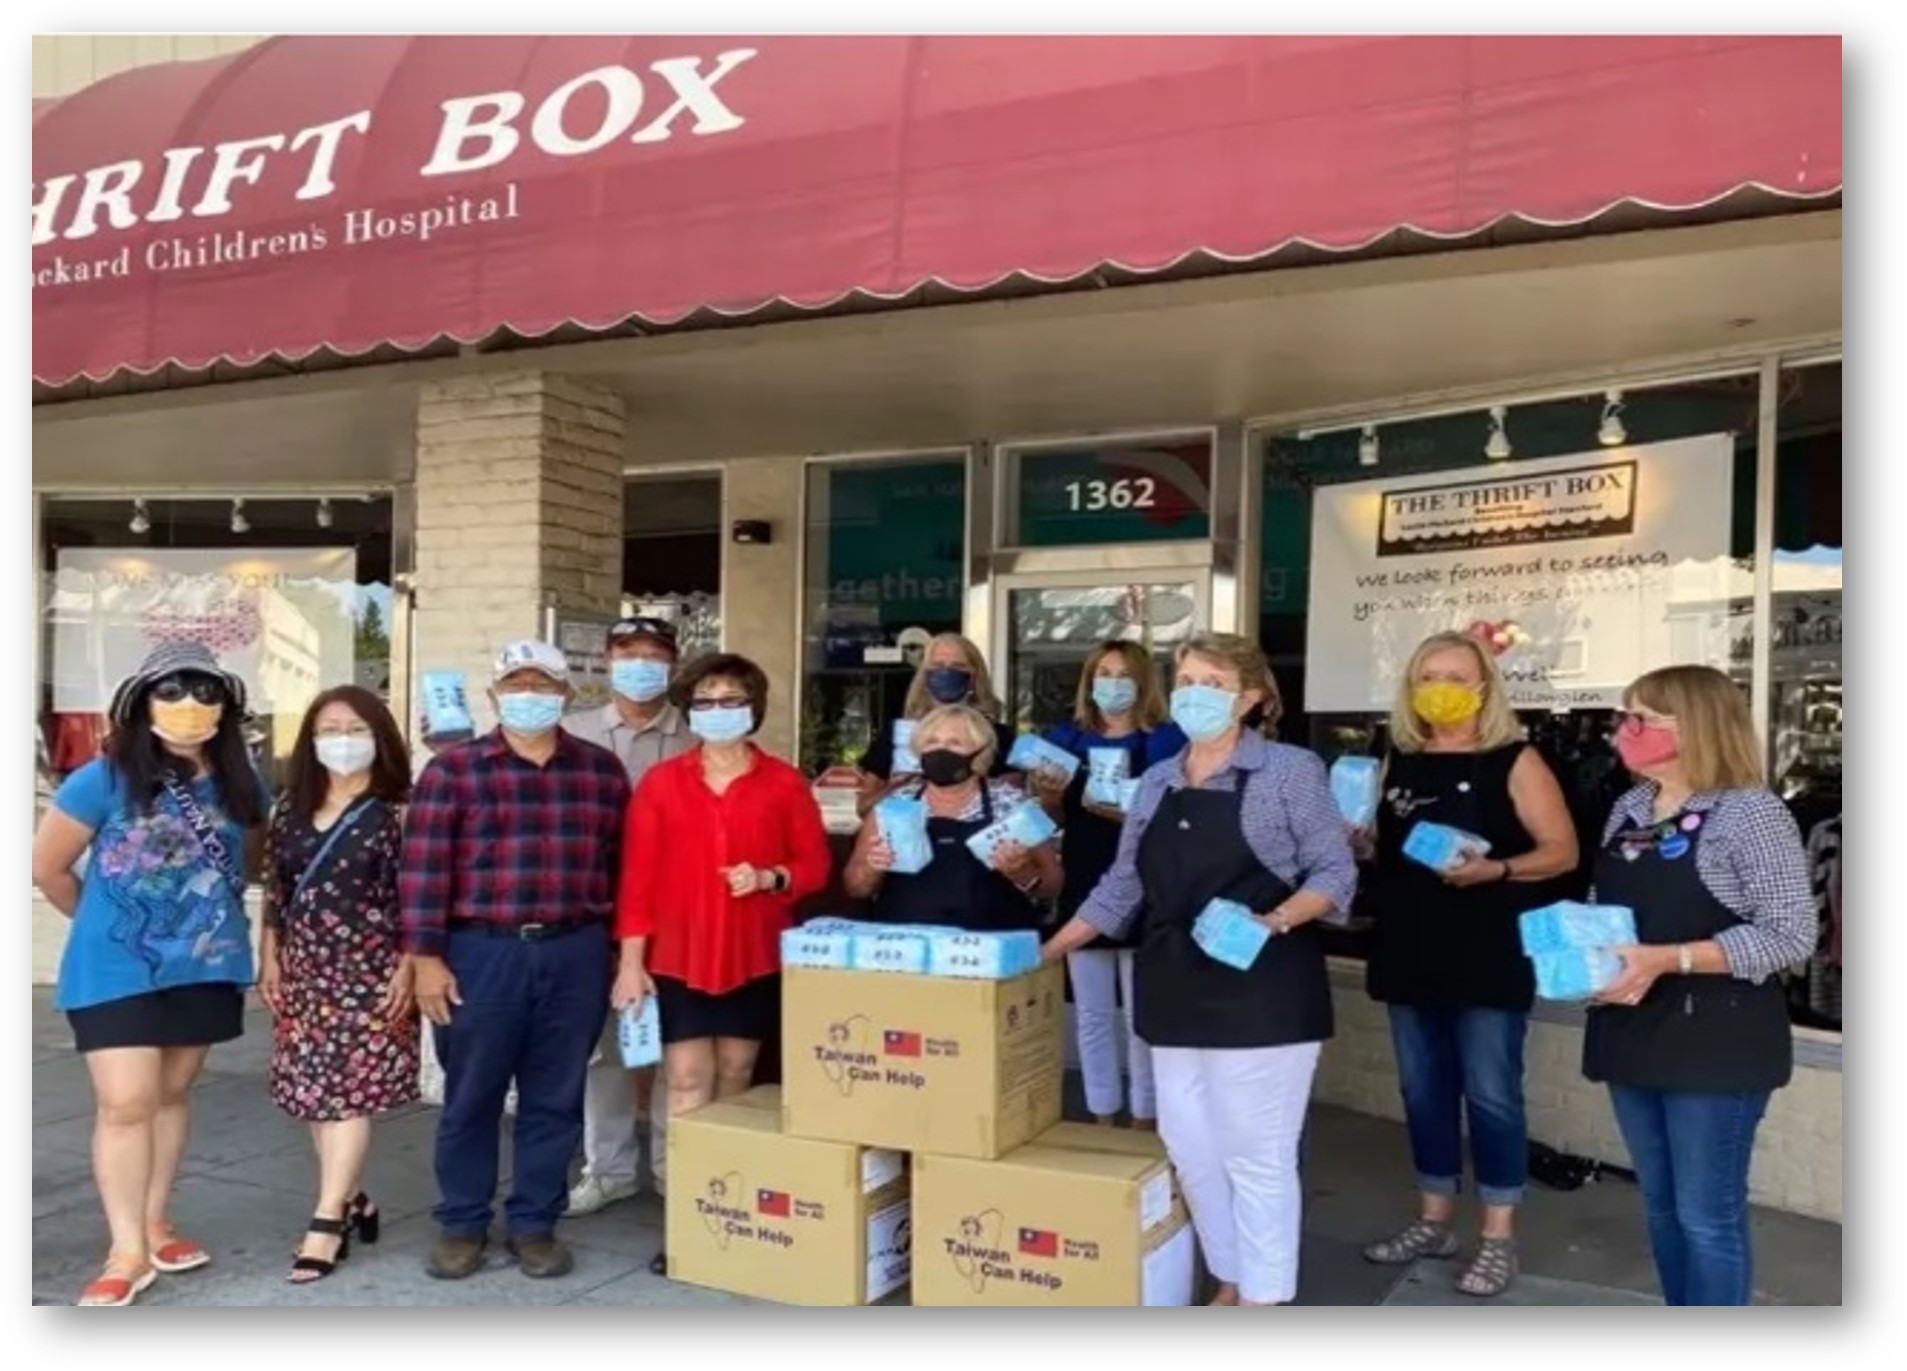 07/29/2020 STUF and AABC donated 7,500 masks to the Thrift Box